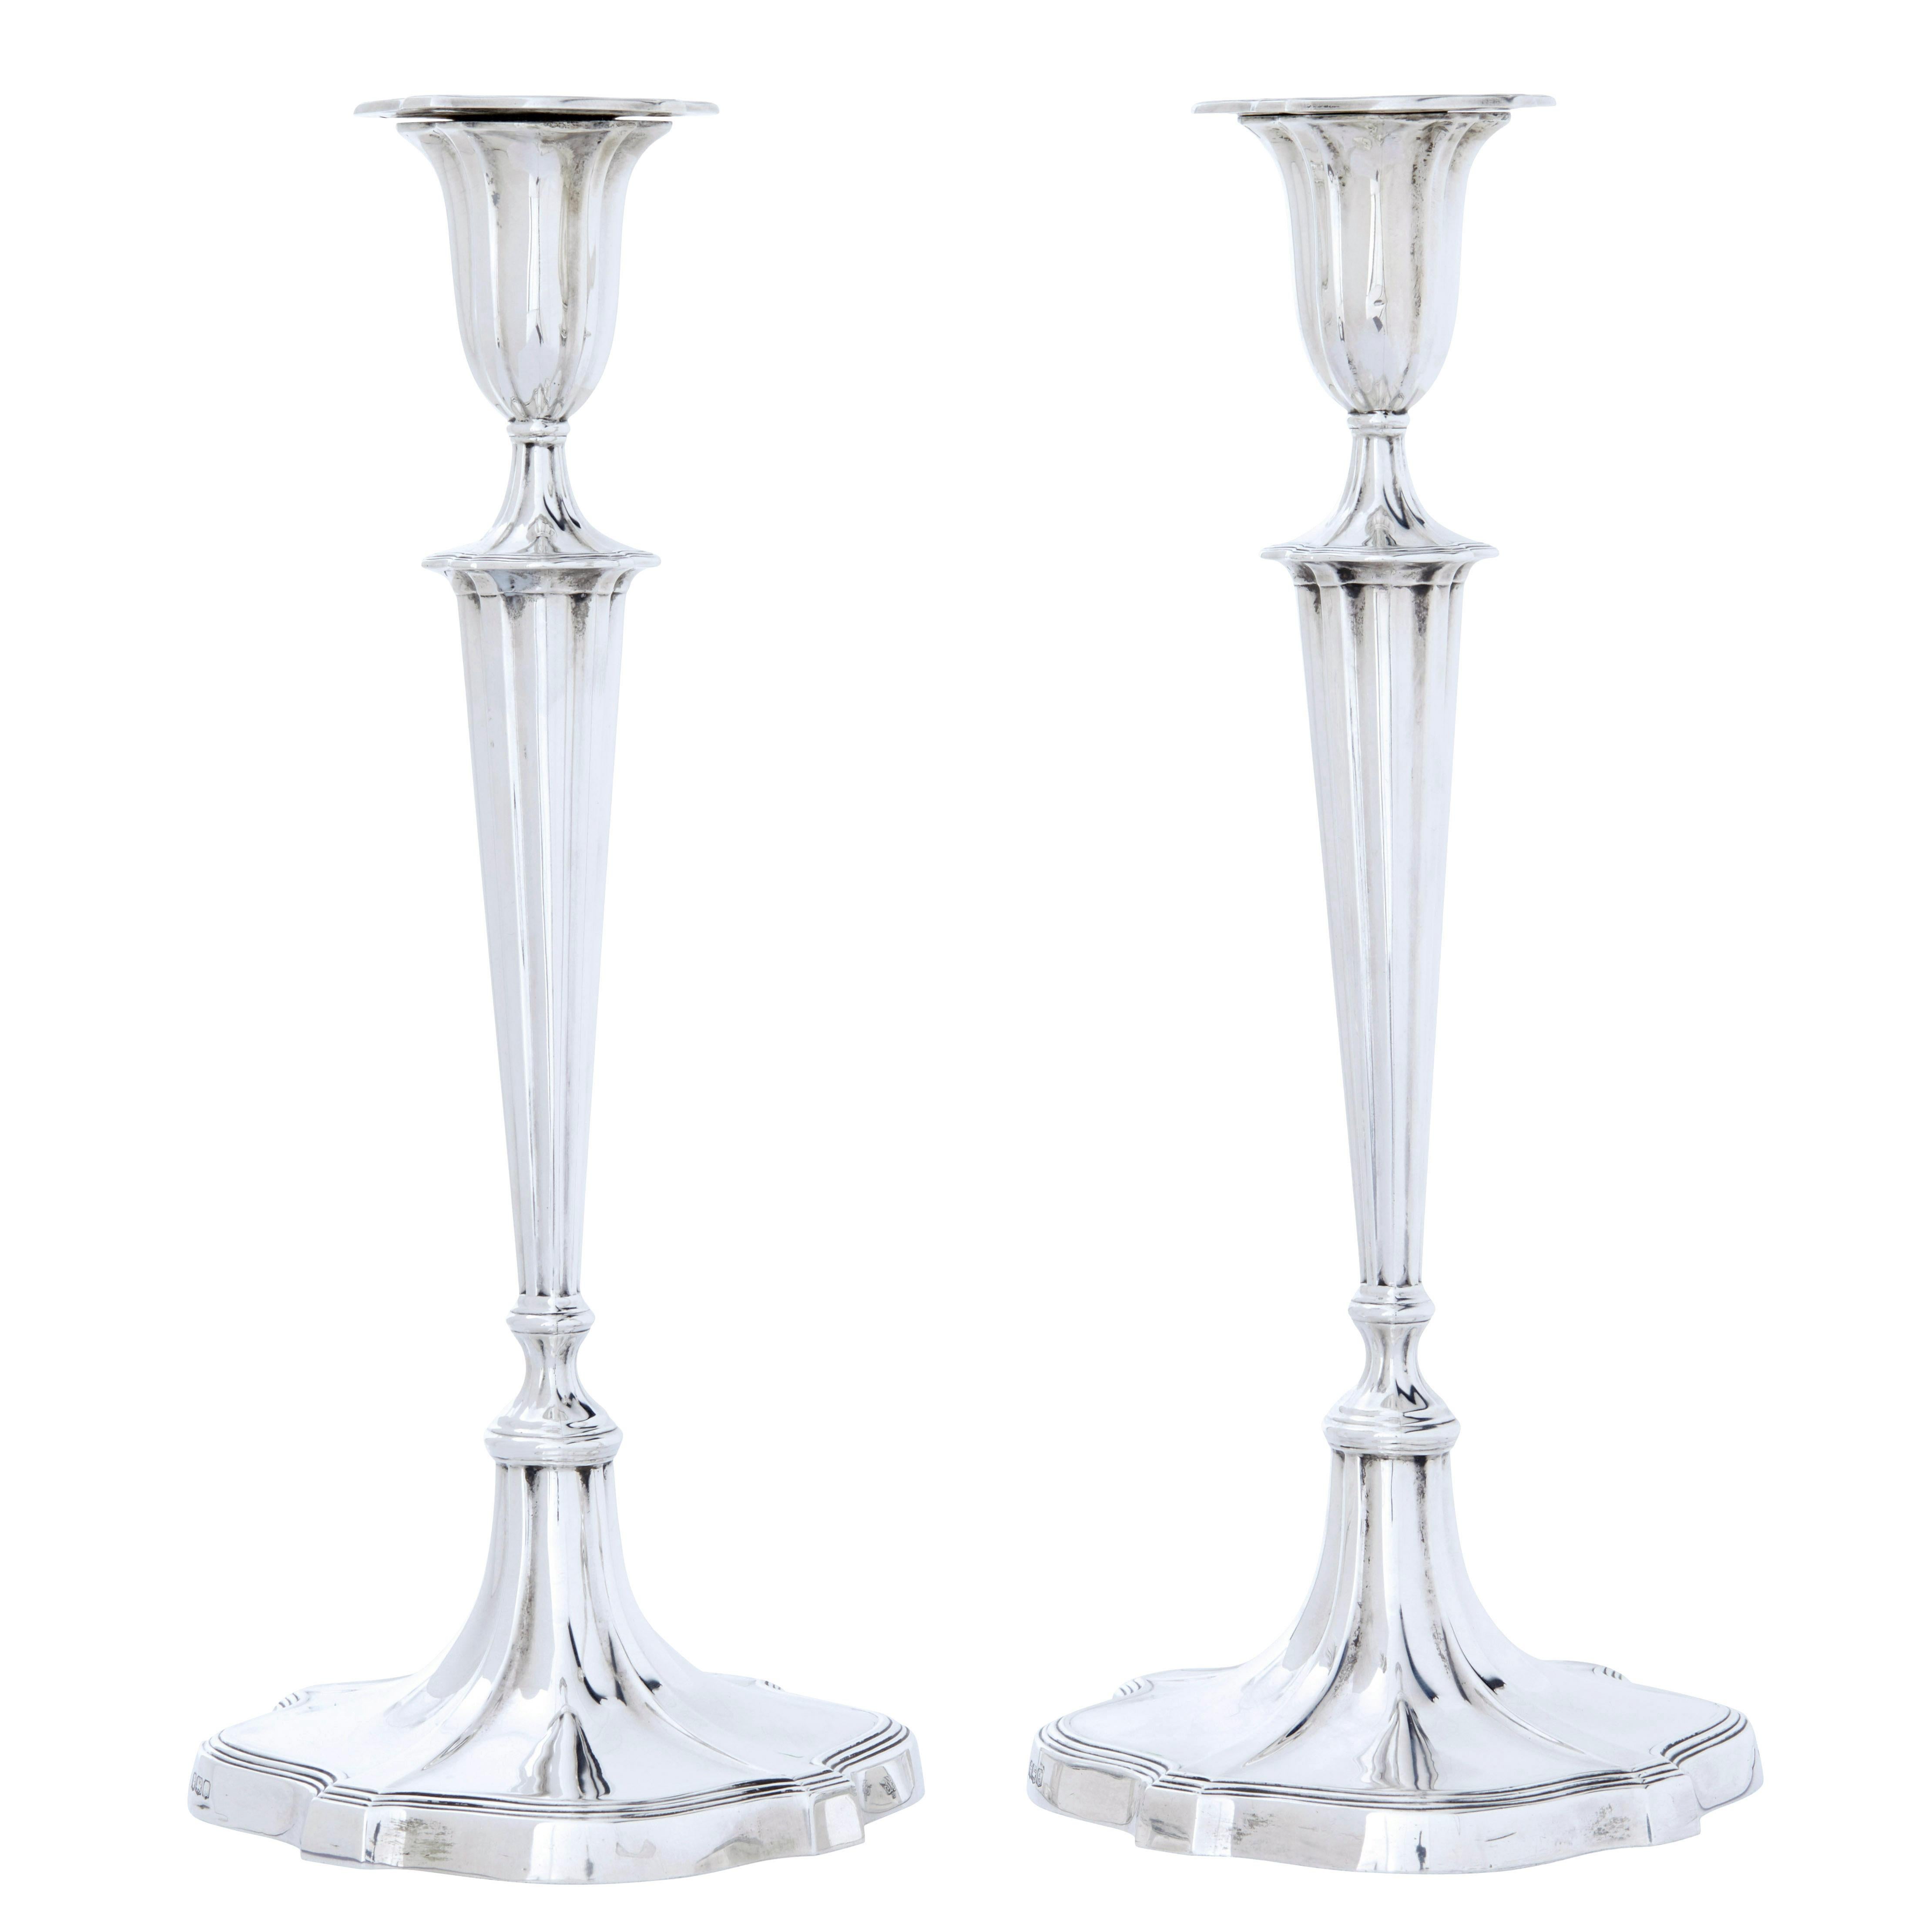 Pair of early 20th century sterling silver candlesticks circa 1922.

Elegant pair of table candlesticks, with stamped removable tops.  Fluted and tapering stems, standing on a shaped base.

Stamped on the bottom Ryrie Bros ltd made in